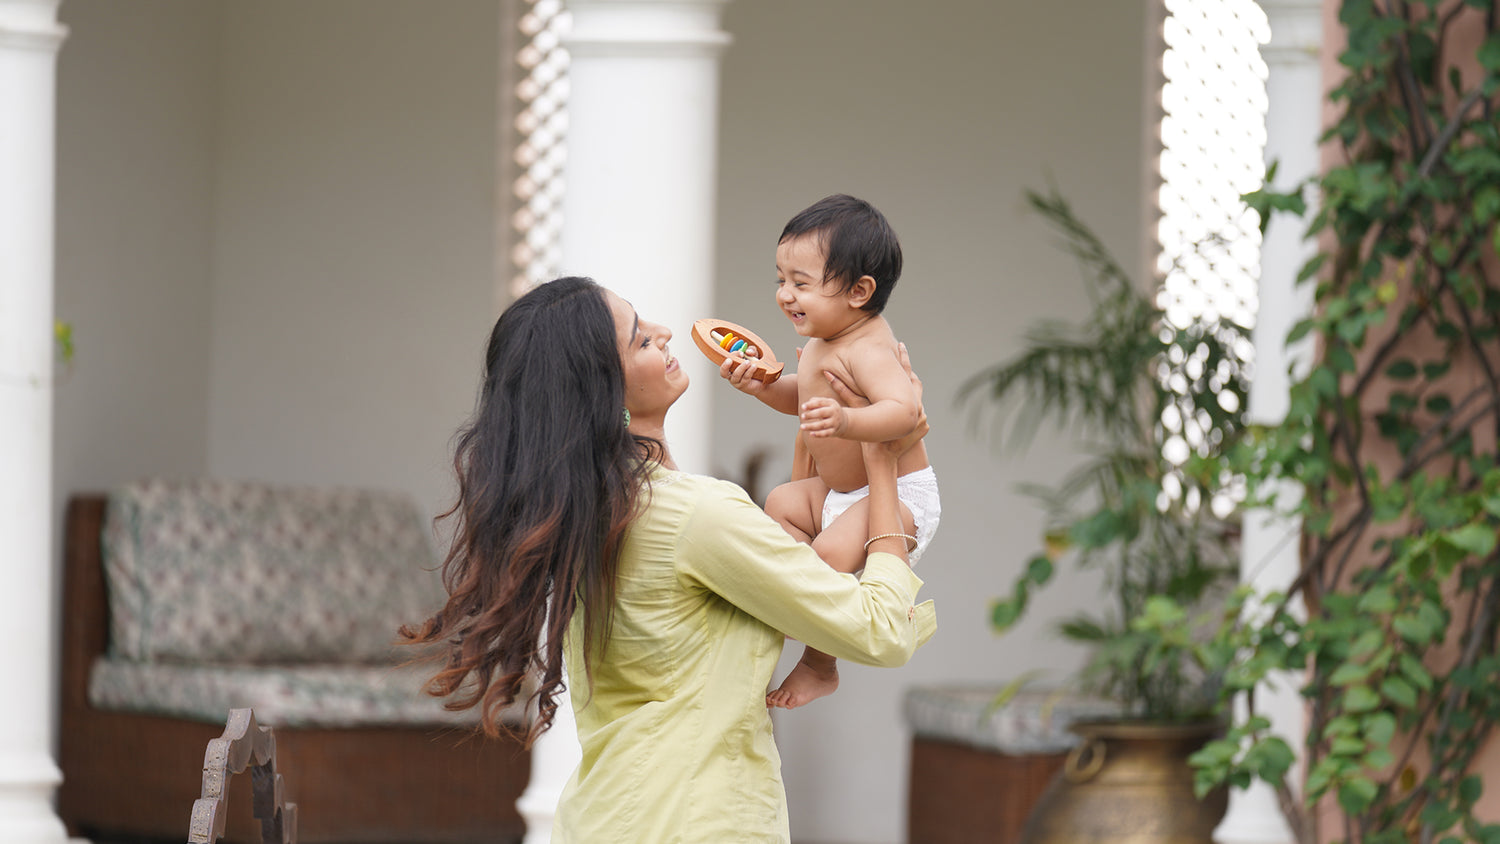 Baby Playtime Guide: What You Must Consider While Playing With Your Baby!